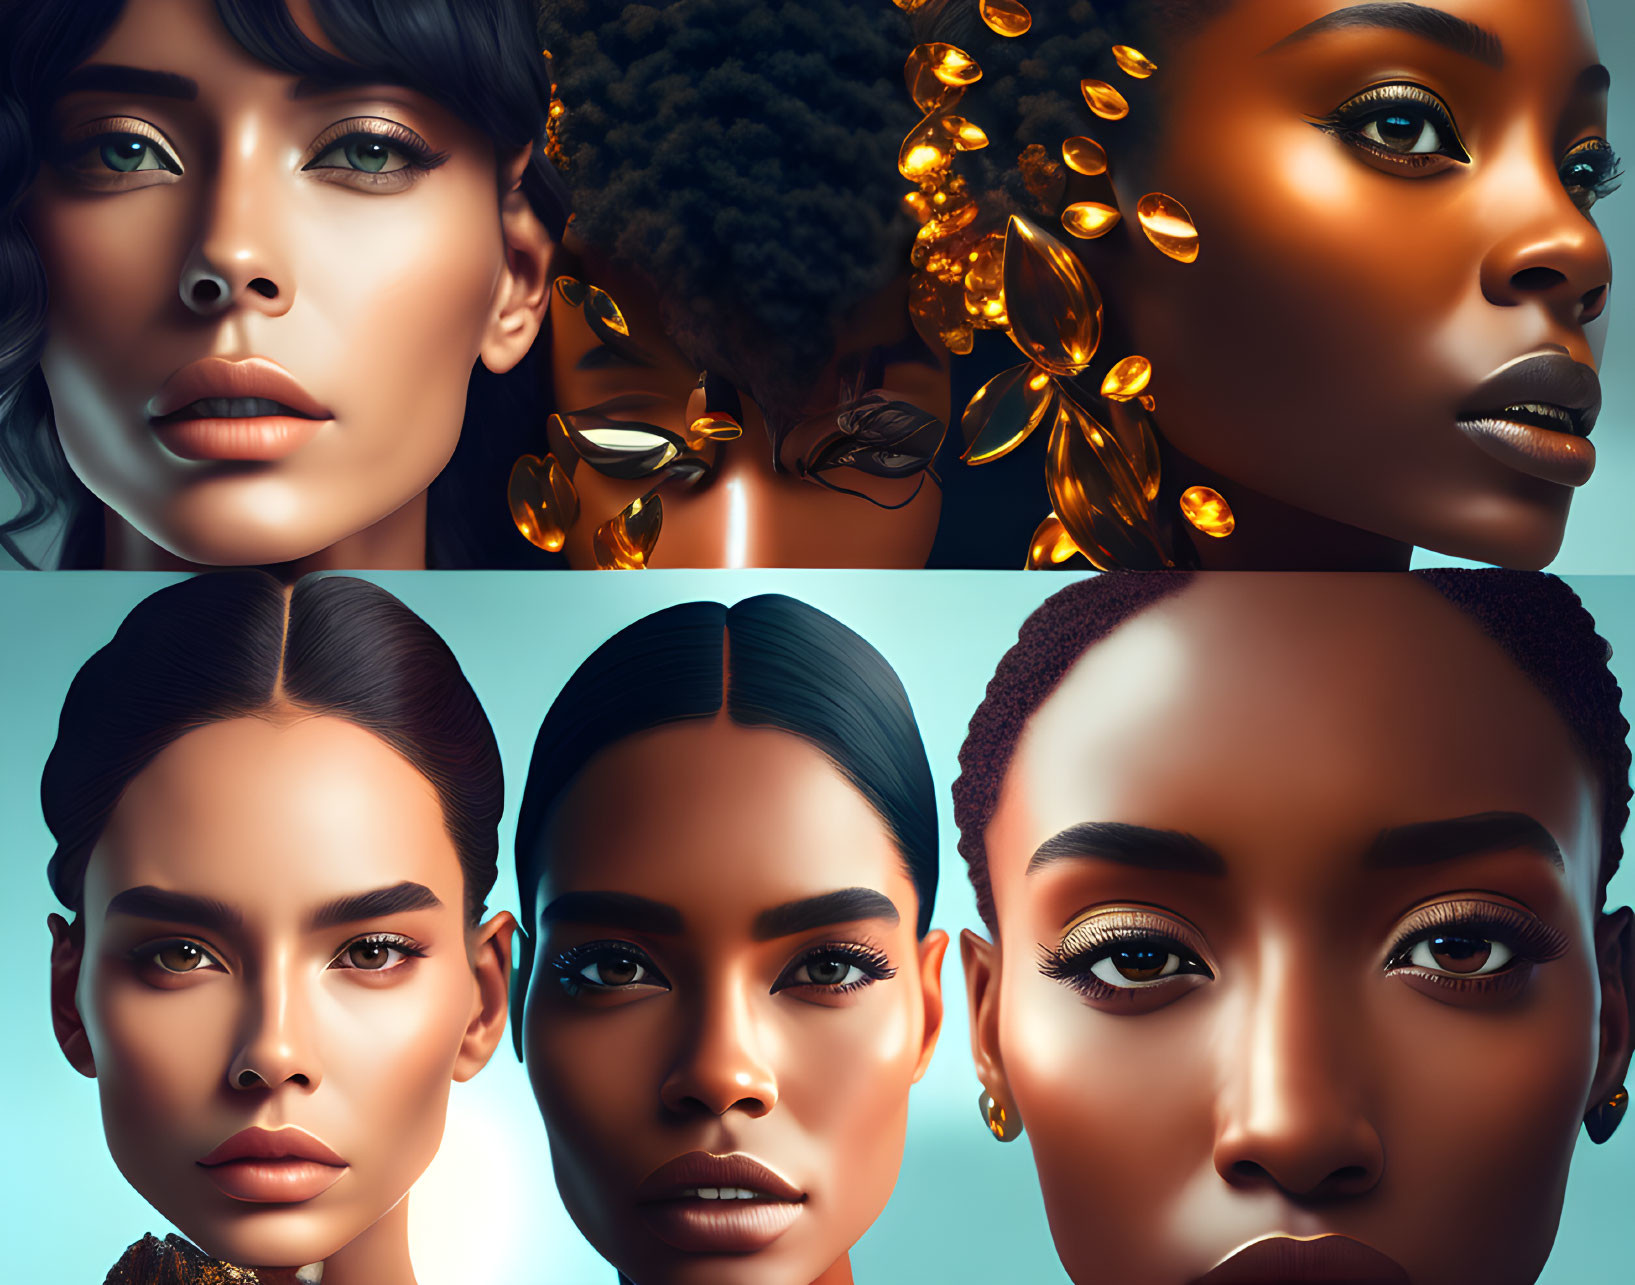 Stylized portraits of diverse women with unique hairstyles and skin tones